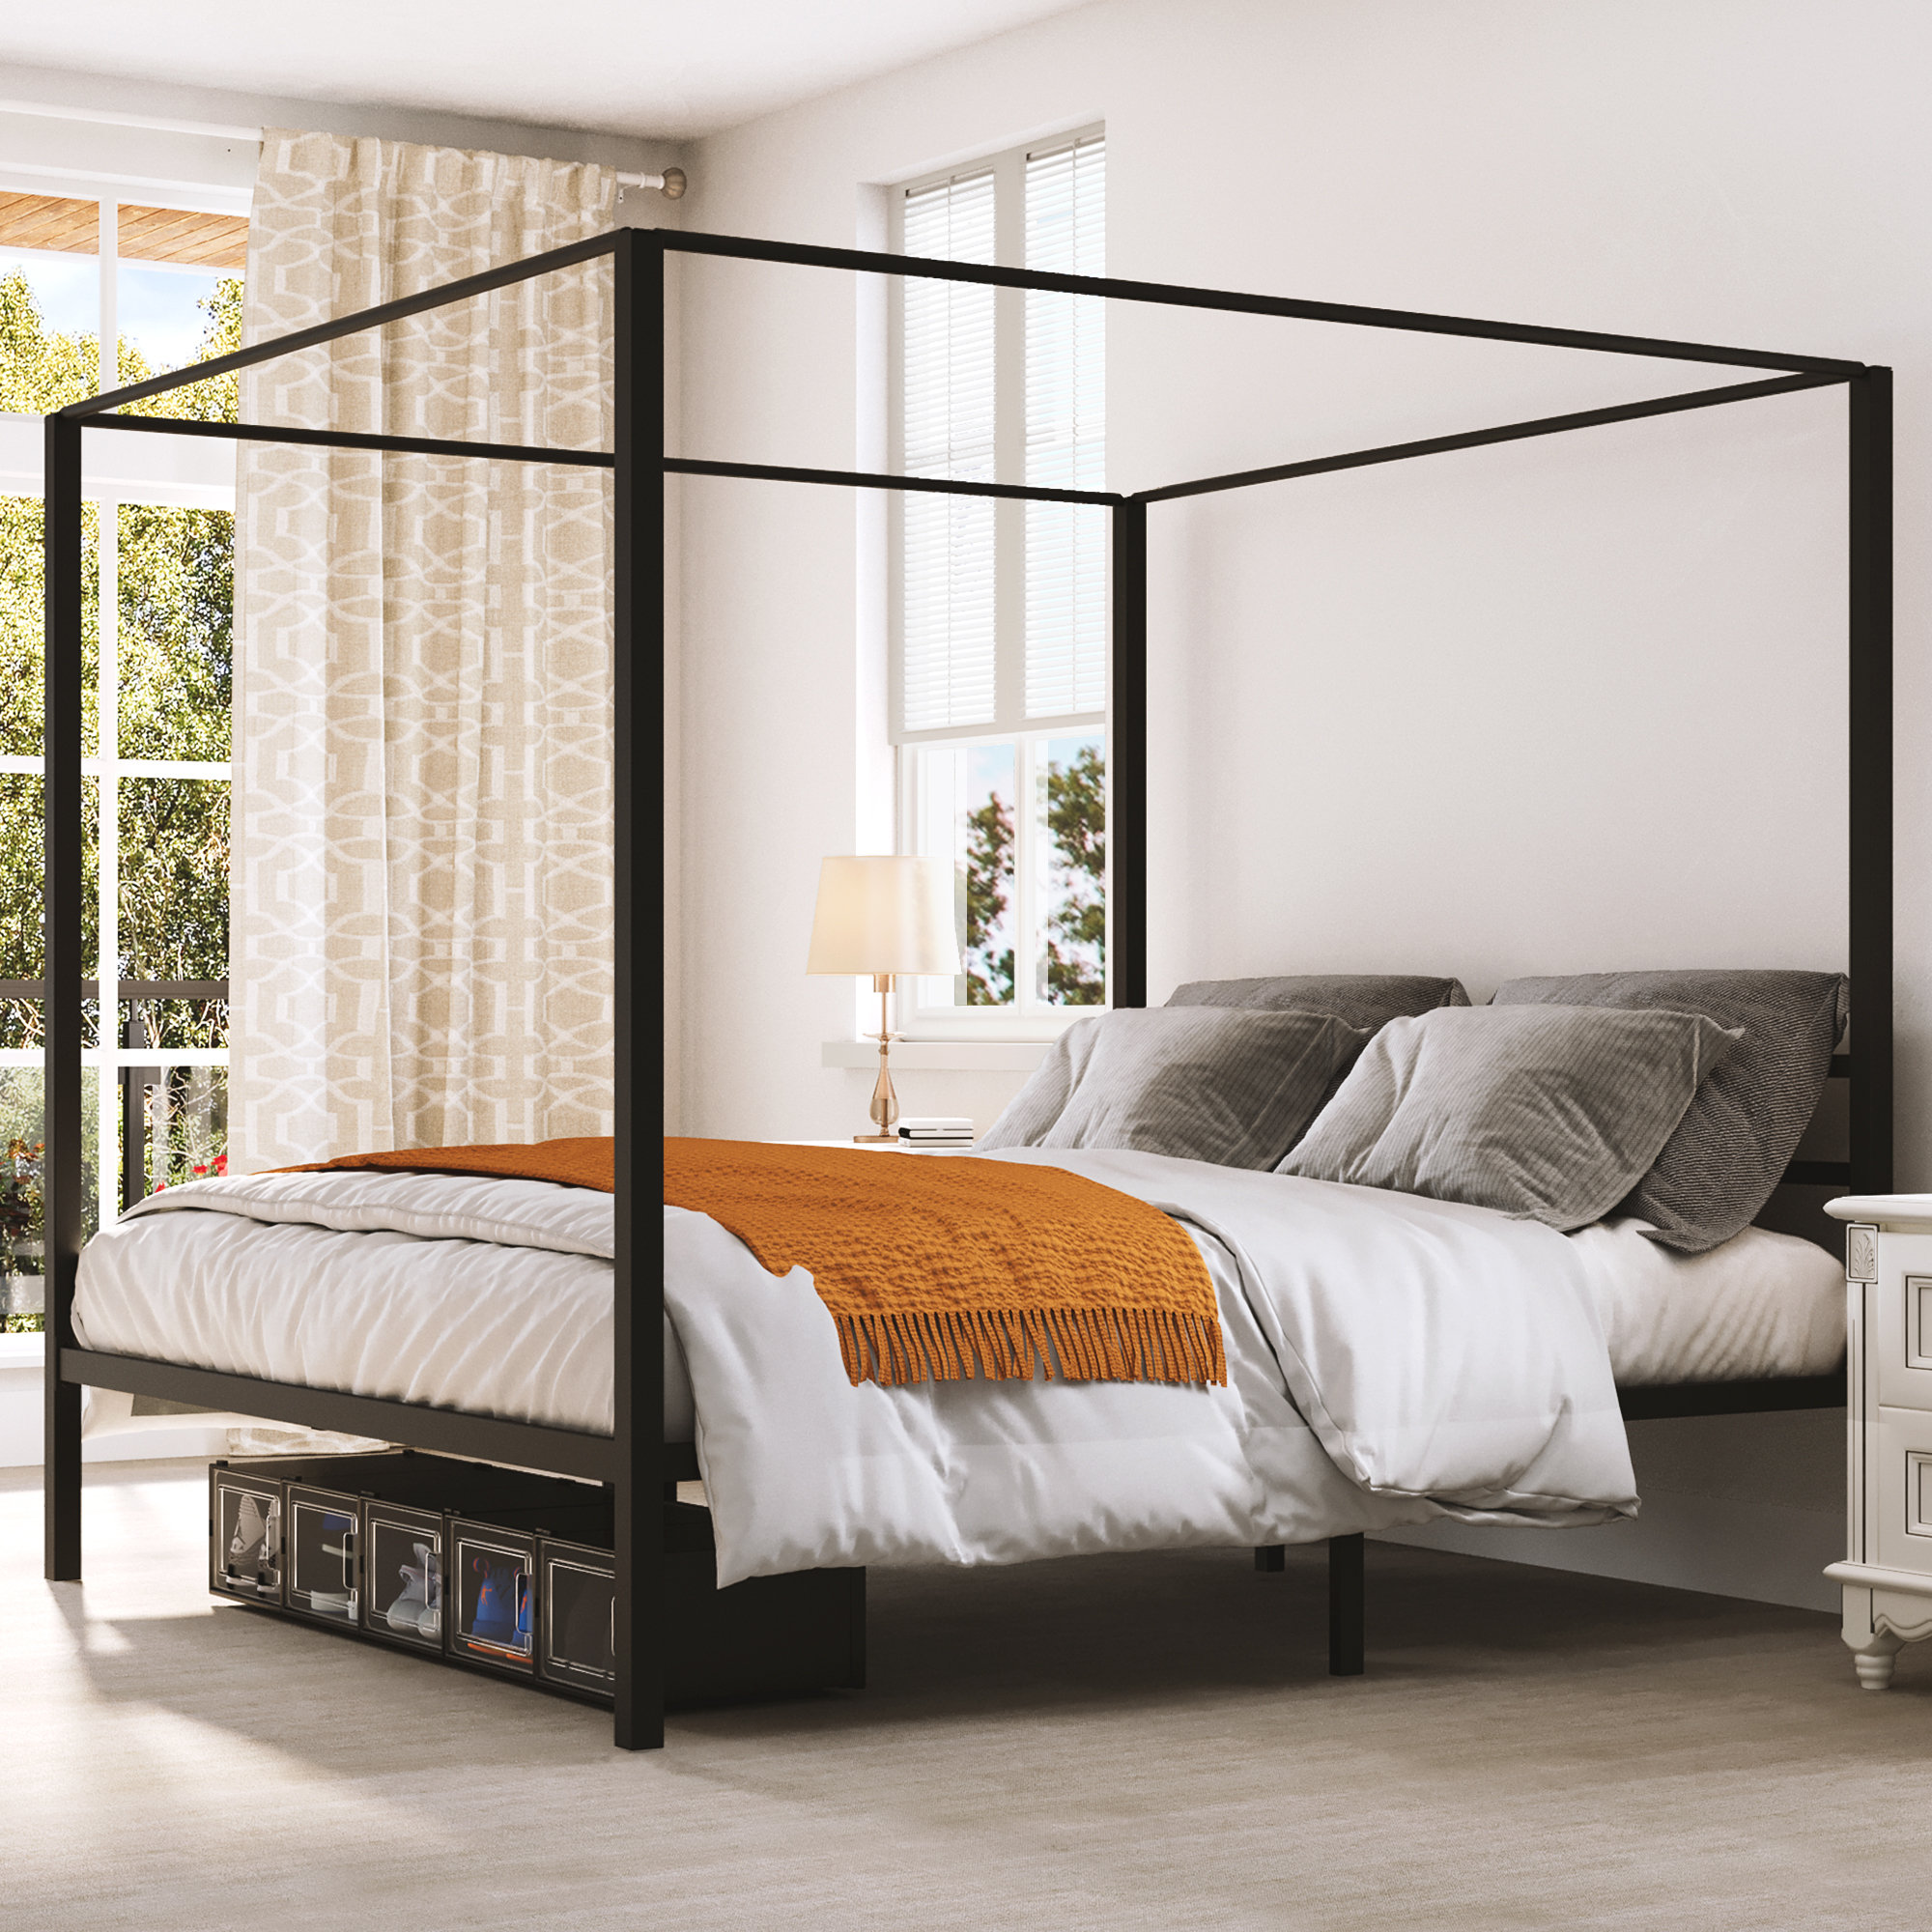 Canopy Bed Frame Vs. Four-Poster Bed: Comparing Designs And Aesthetics  